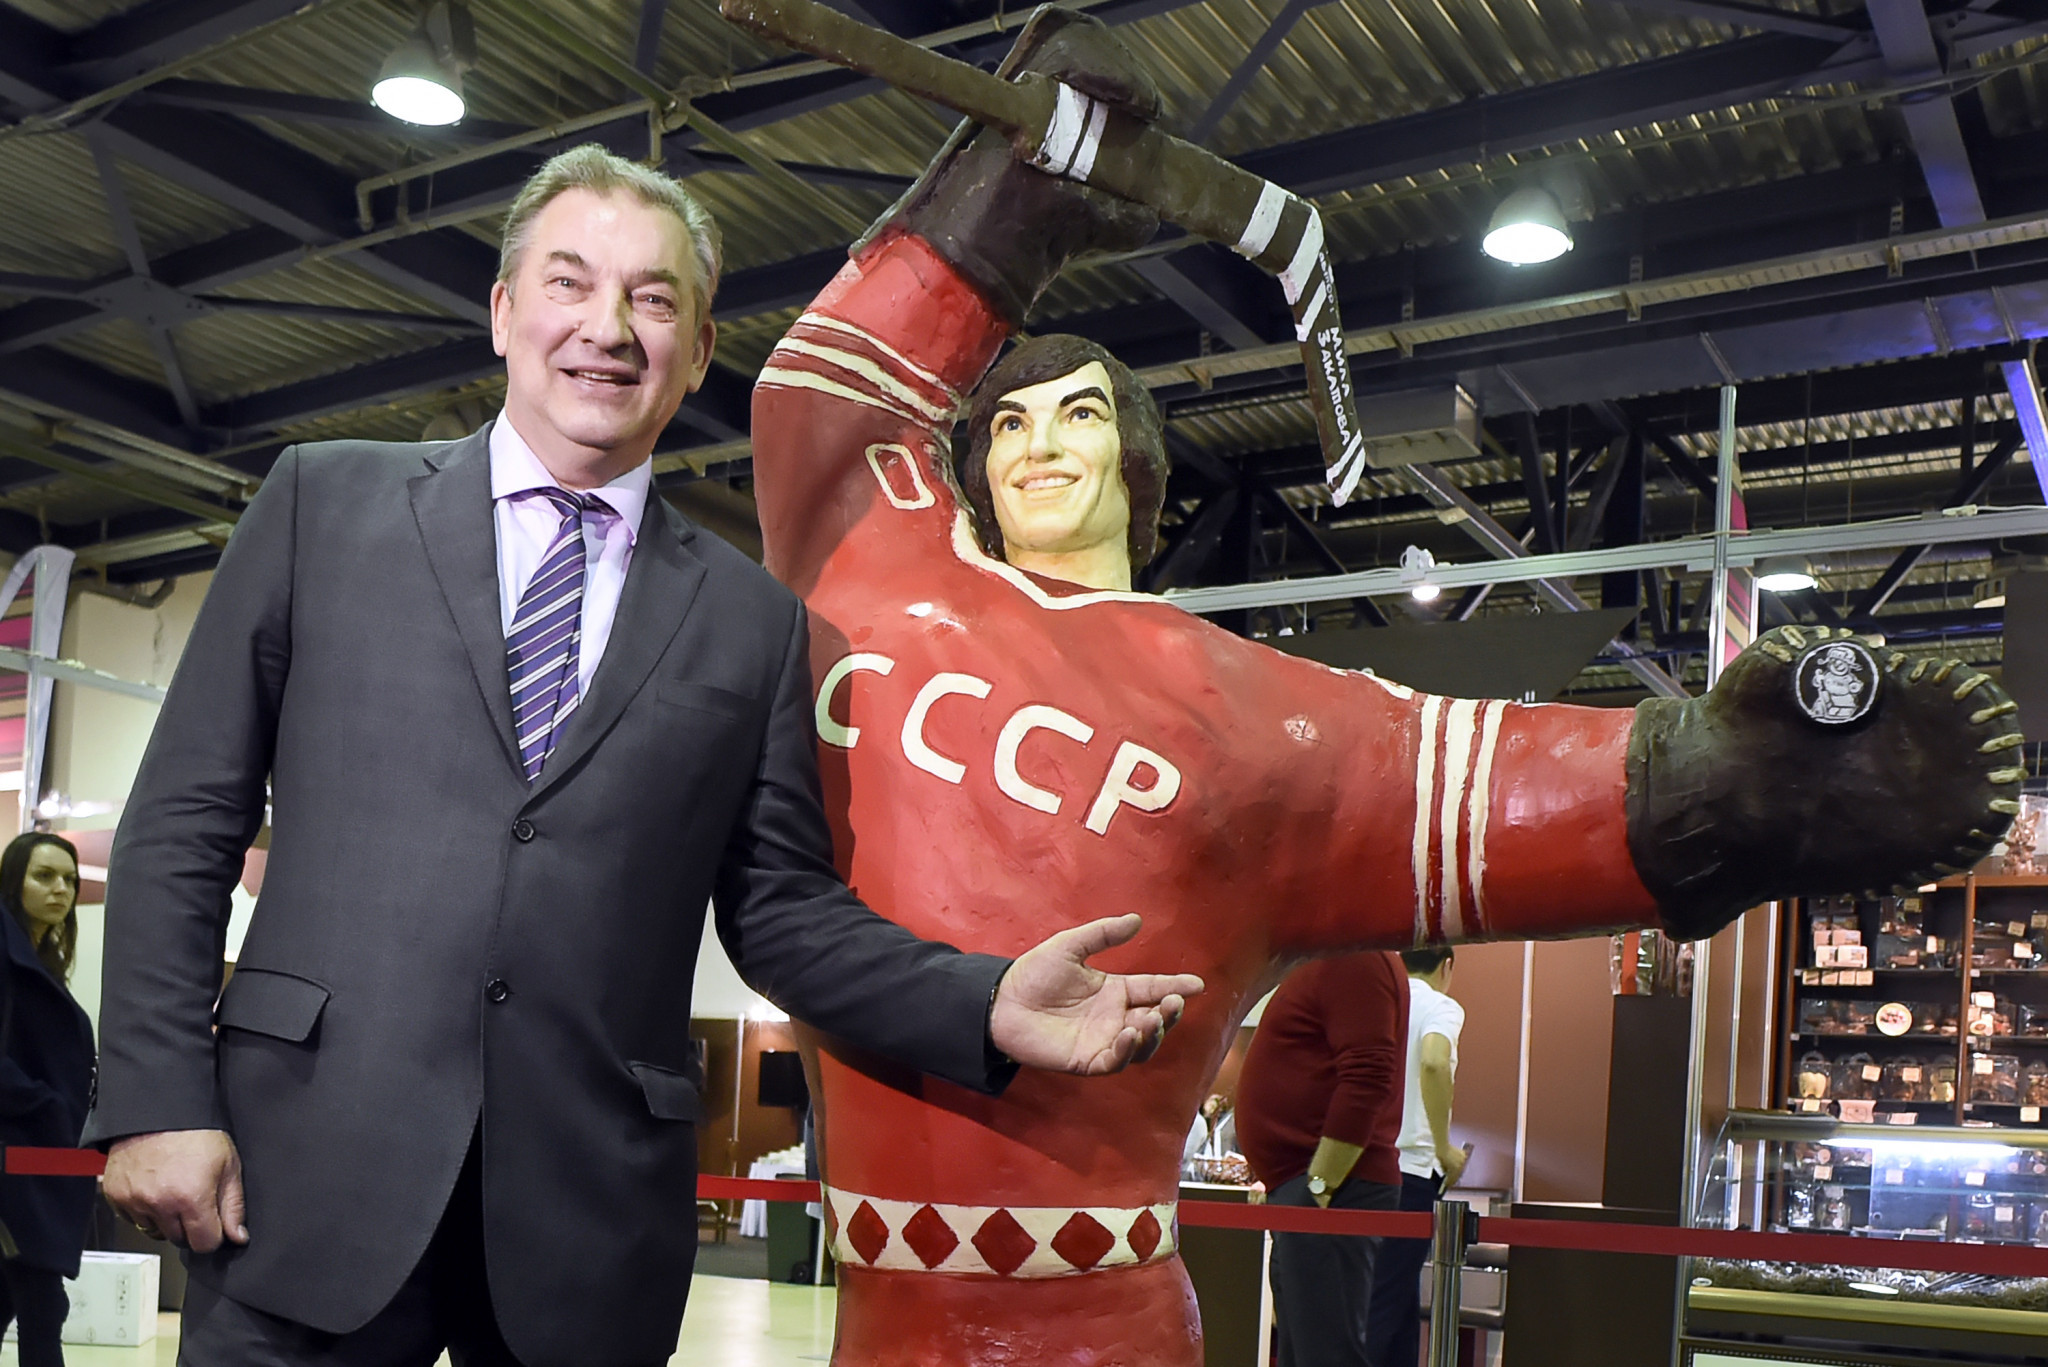 Tretiak vows to increase participation as wins unanimous victory in Russian Ice Hockey Federation election